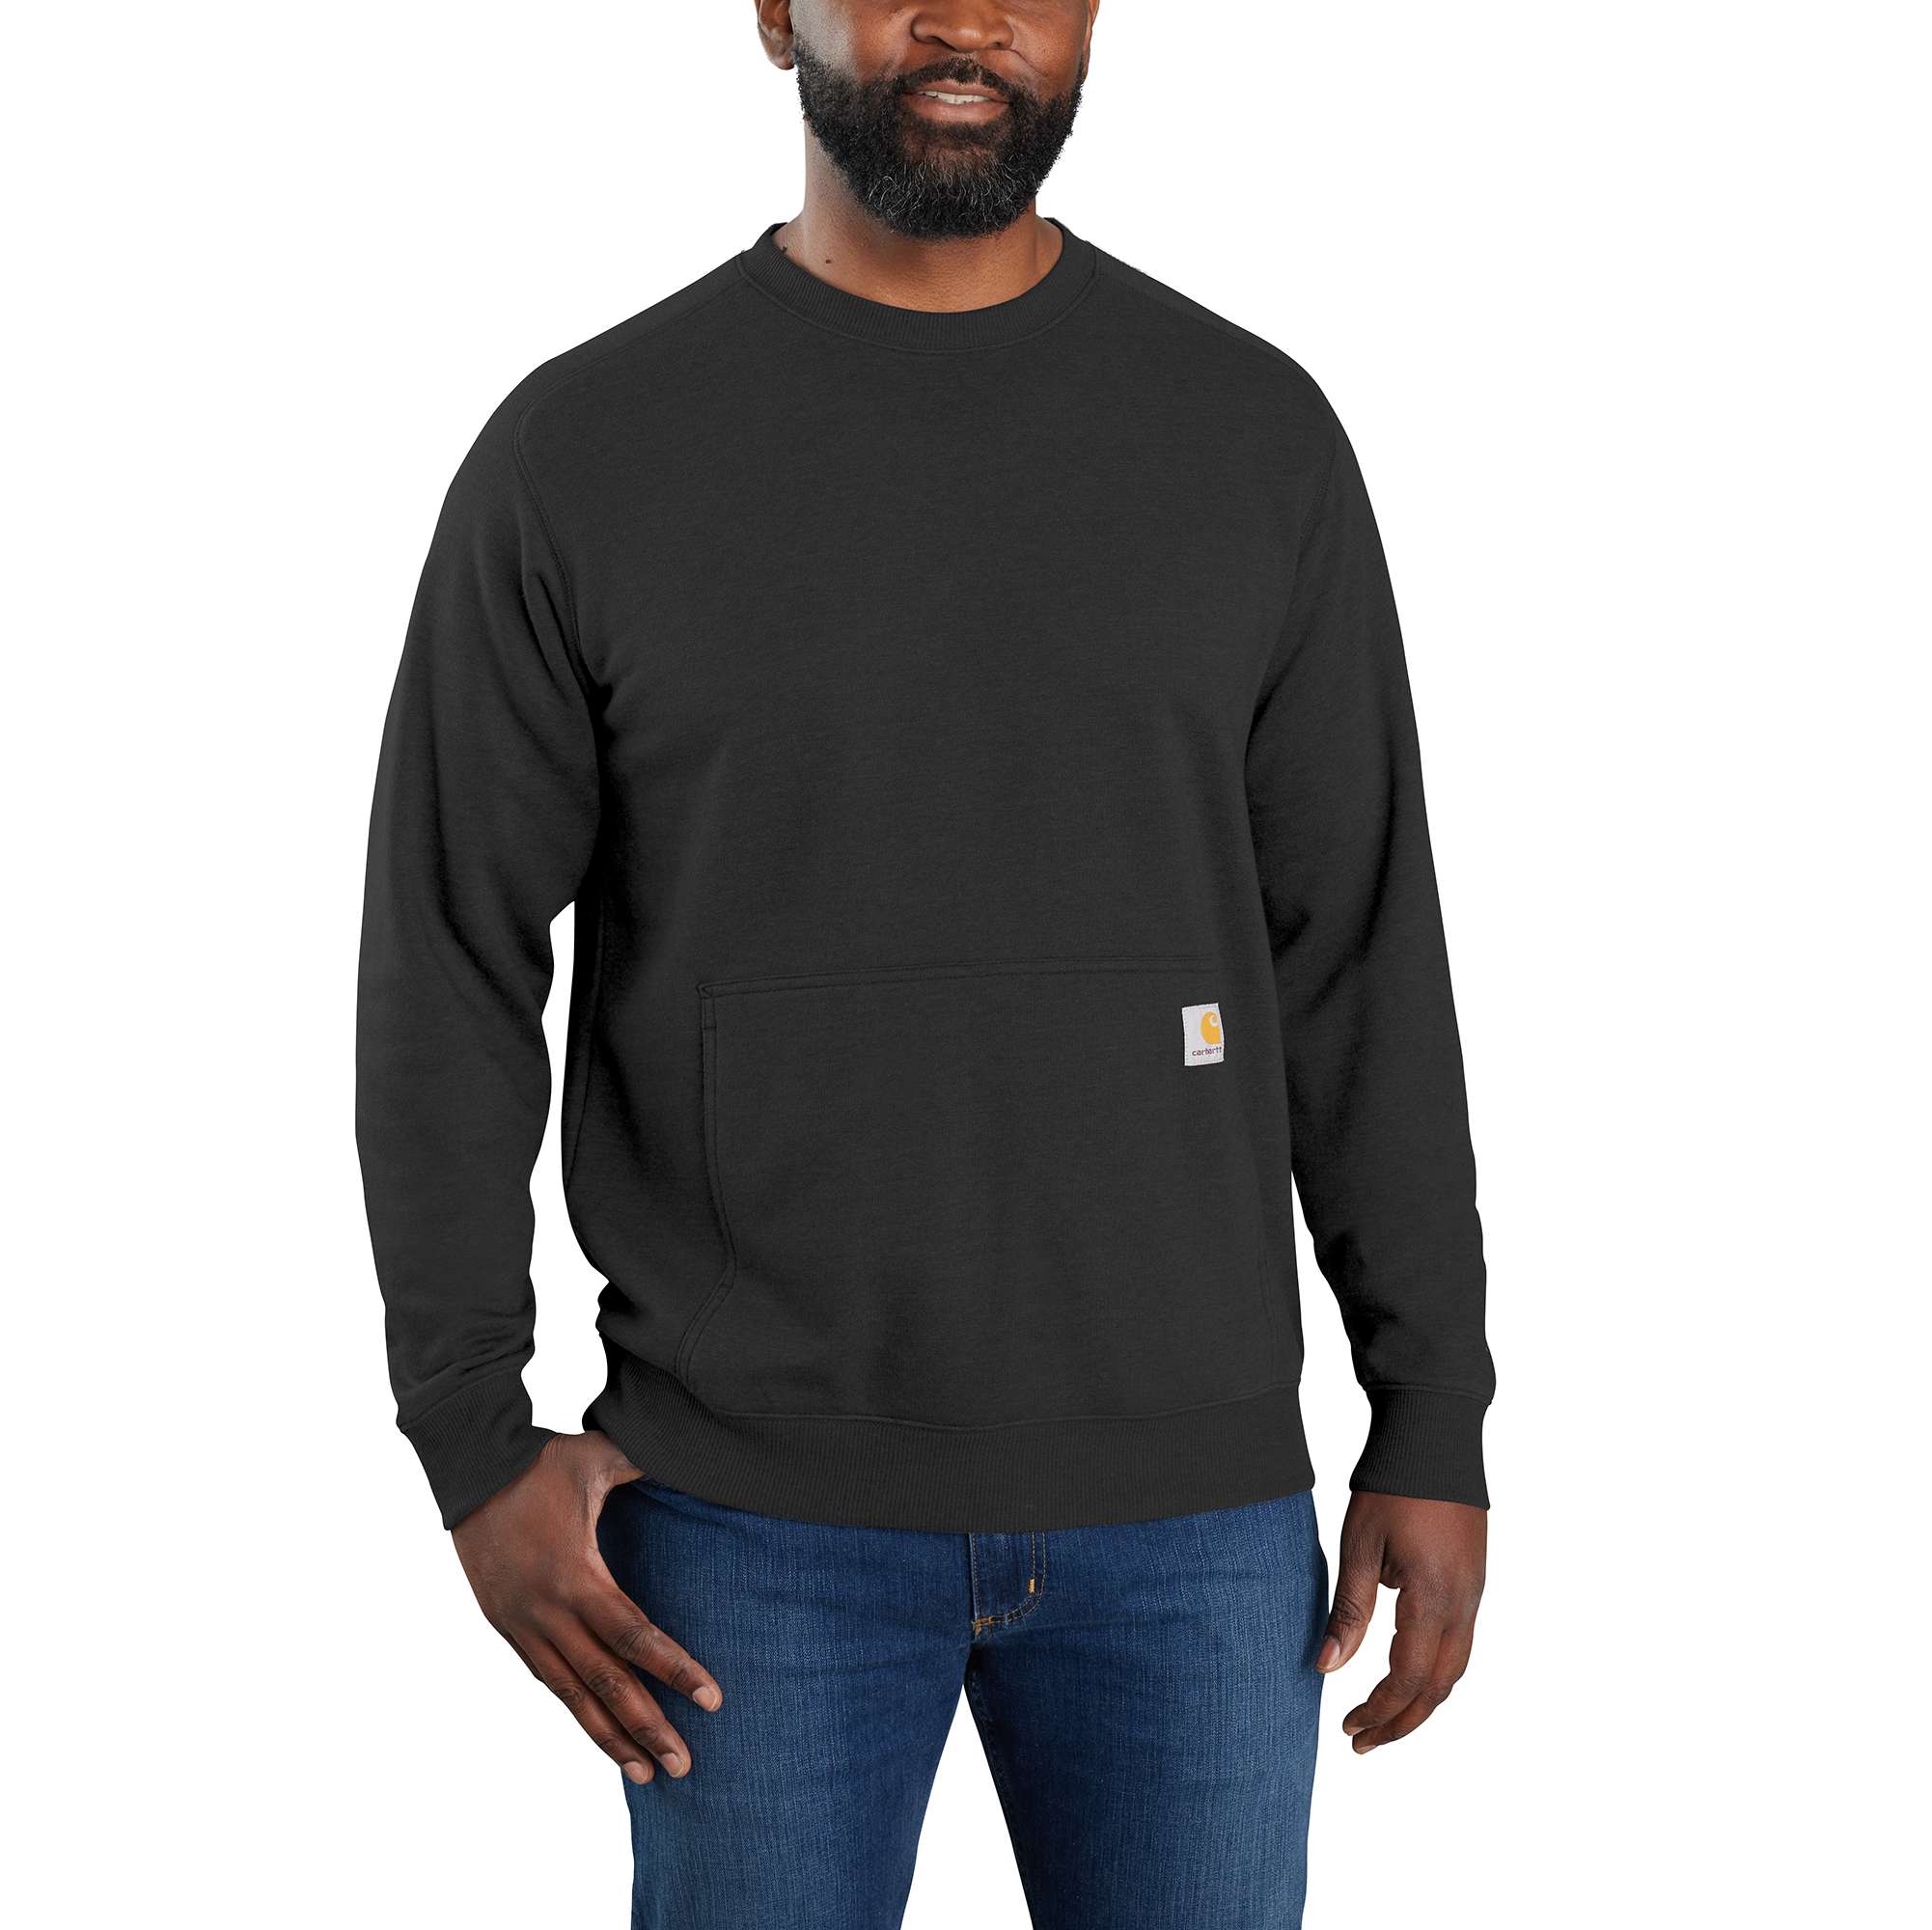 Carhartt Men's & Women's Force Relaxed Fit Lightweight Crewneck Sweater (2 Colors) $33 + Free Shipping